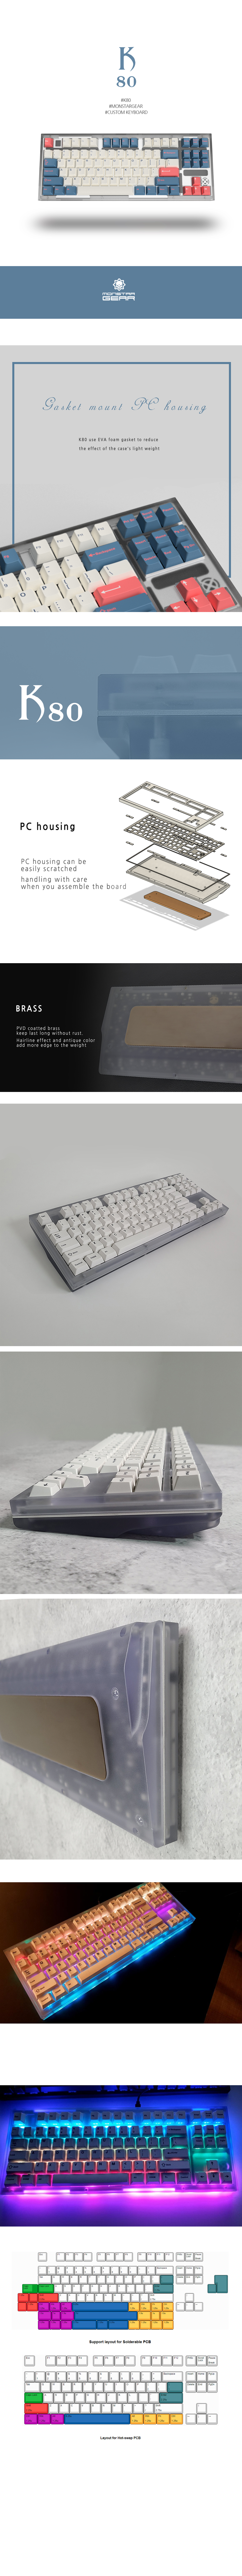 k80oh